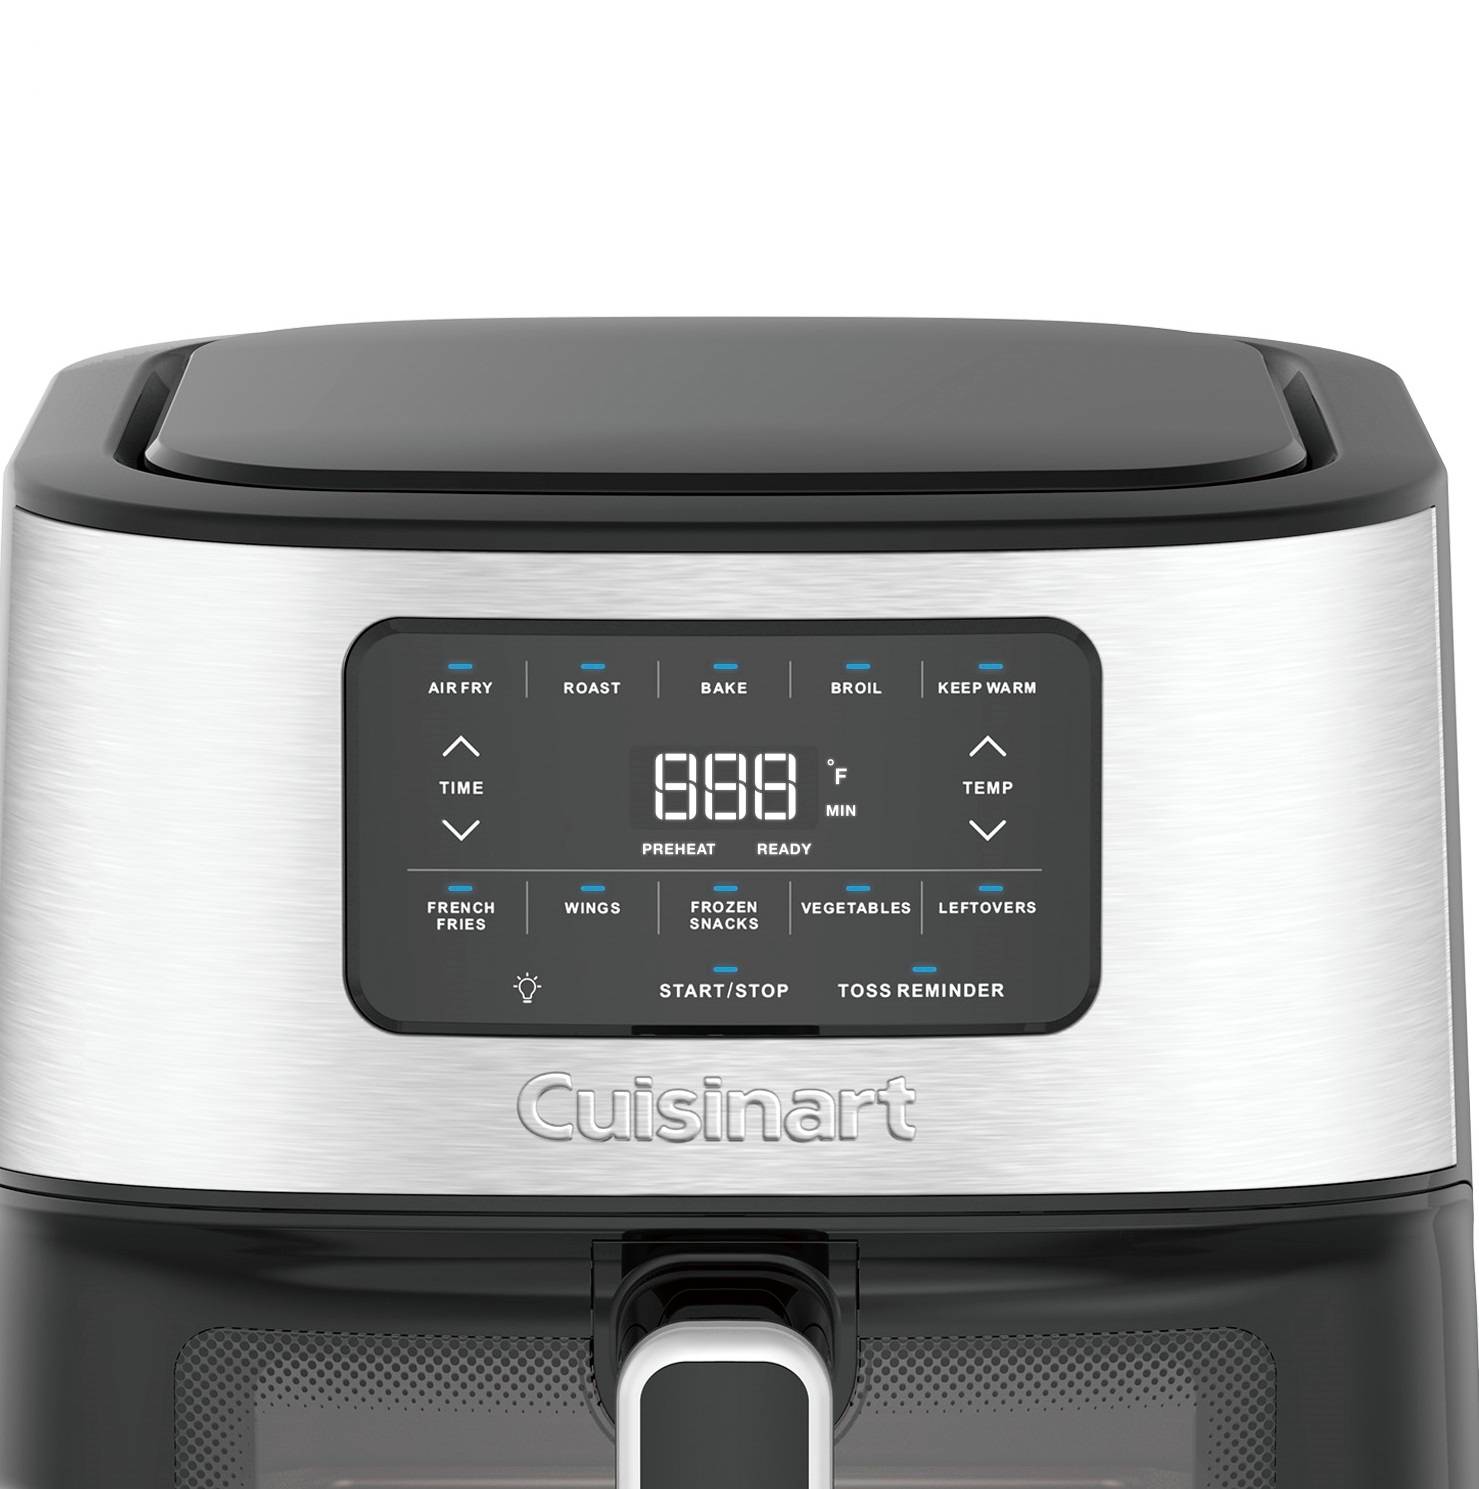 Simplify Your Cooking with the Cuisinart Black Basket Airfryer!